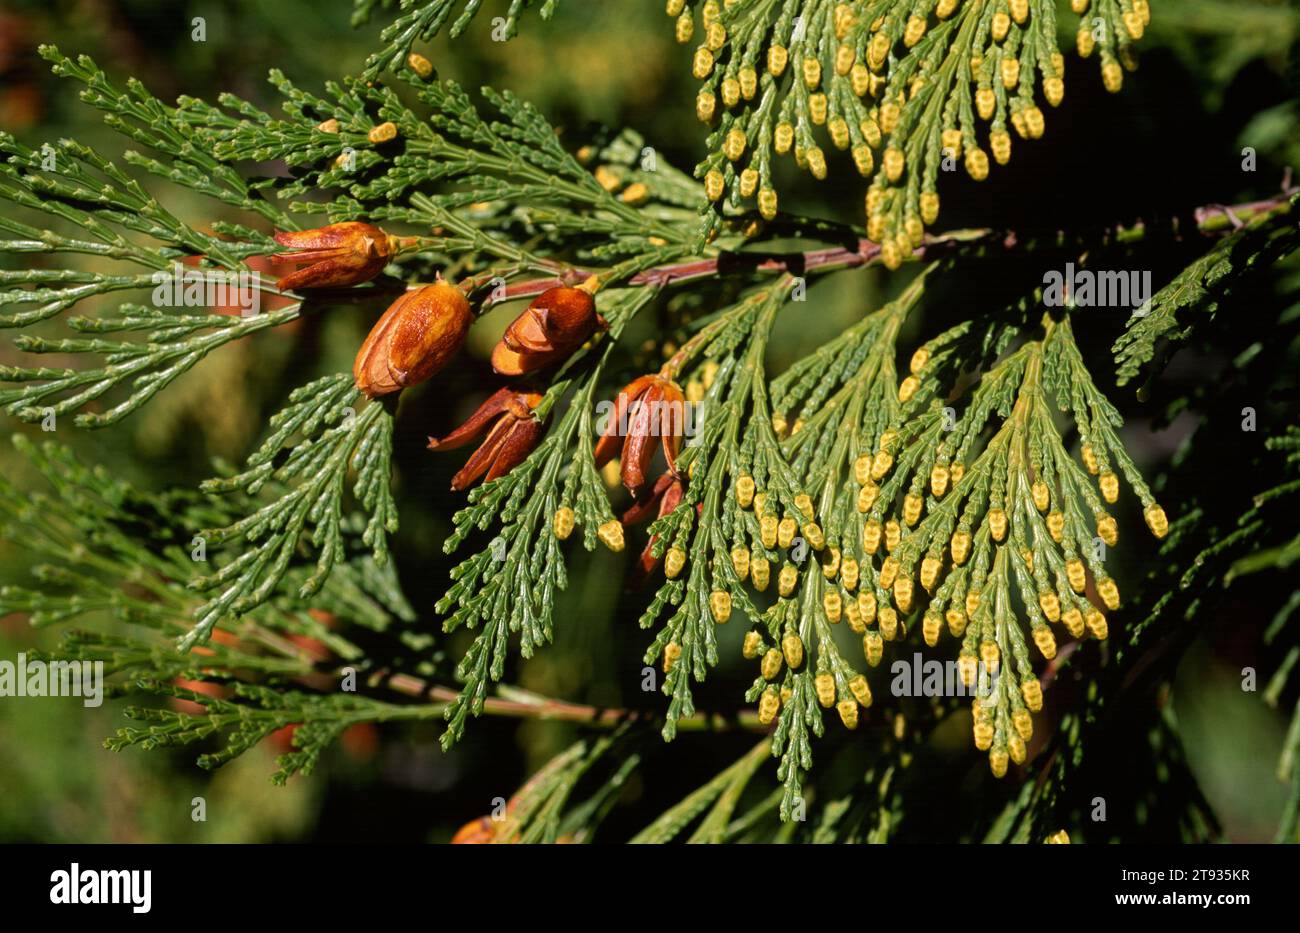 Northern white cedar (Thuja occidentalis) is a evergreen tree native to southeastern Canada and northeastern USA. Cones, male flowers and leaves detai Stock Photo